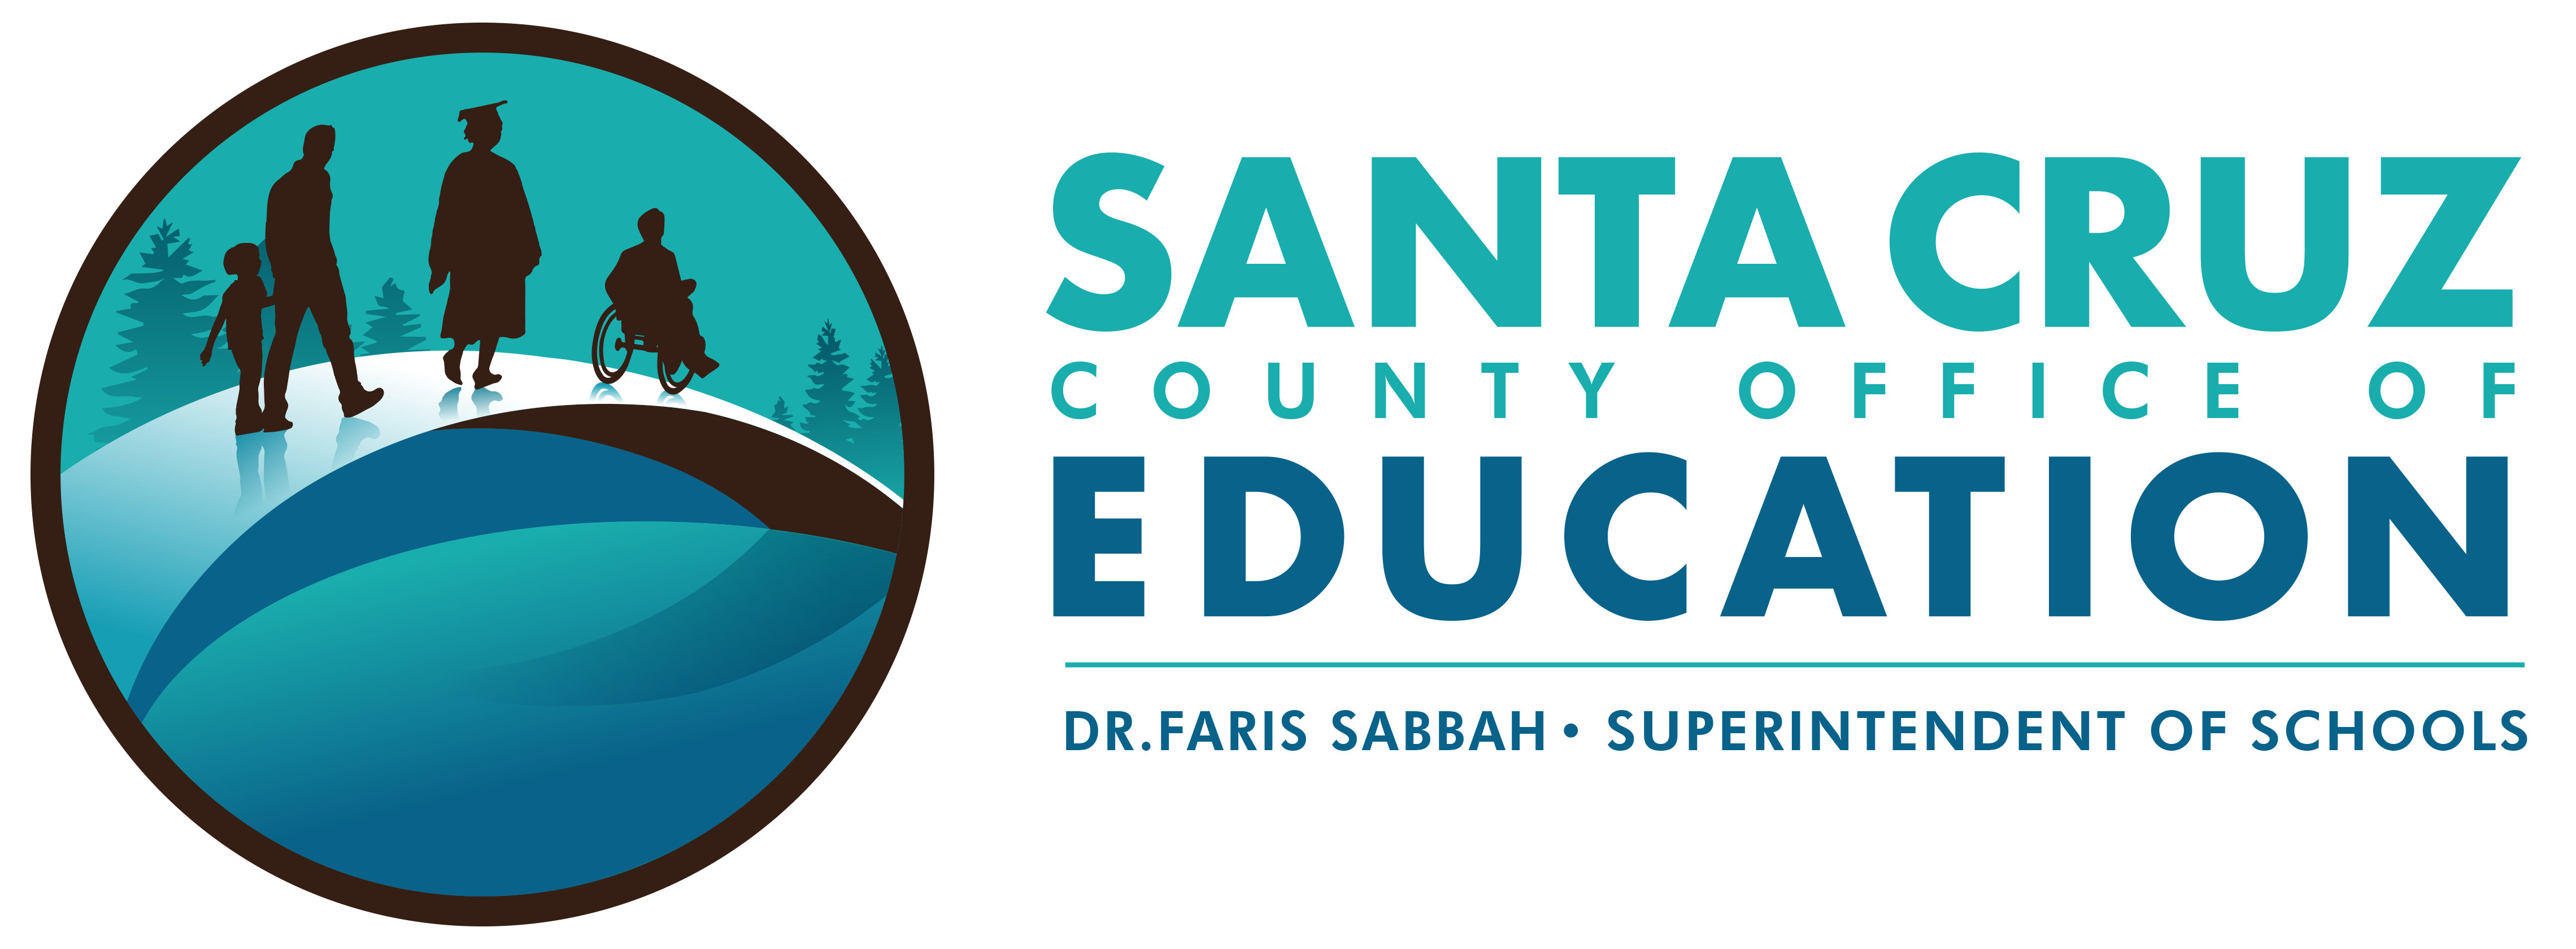 Logo for Santa Cruz County Office of Education, Dr Faris Sabbah Superintdent of Schools featuring a walkway with people walking